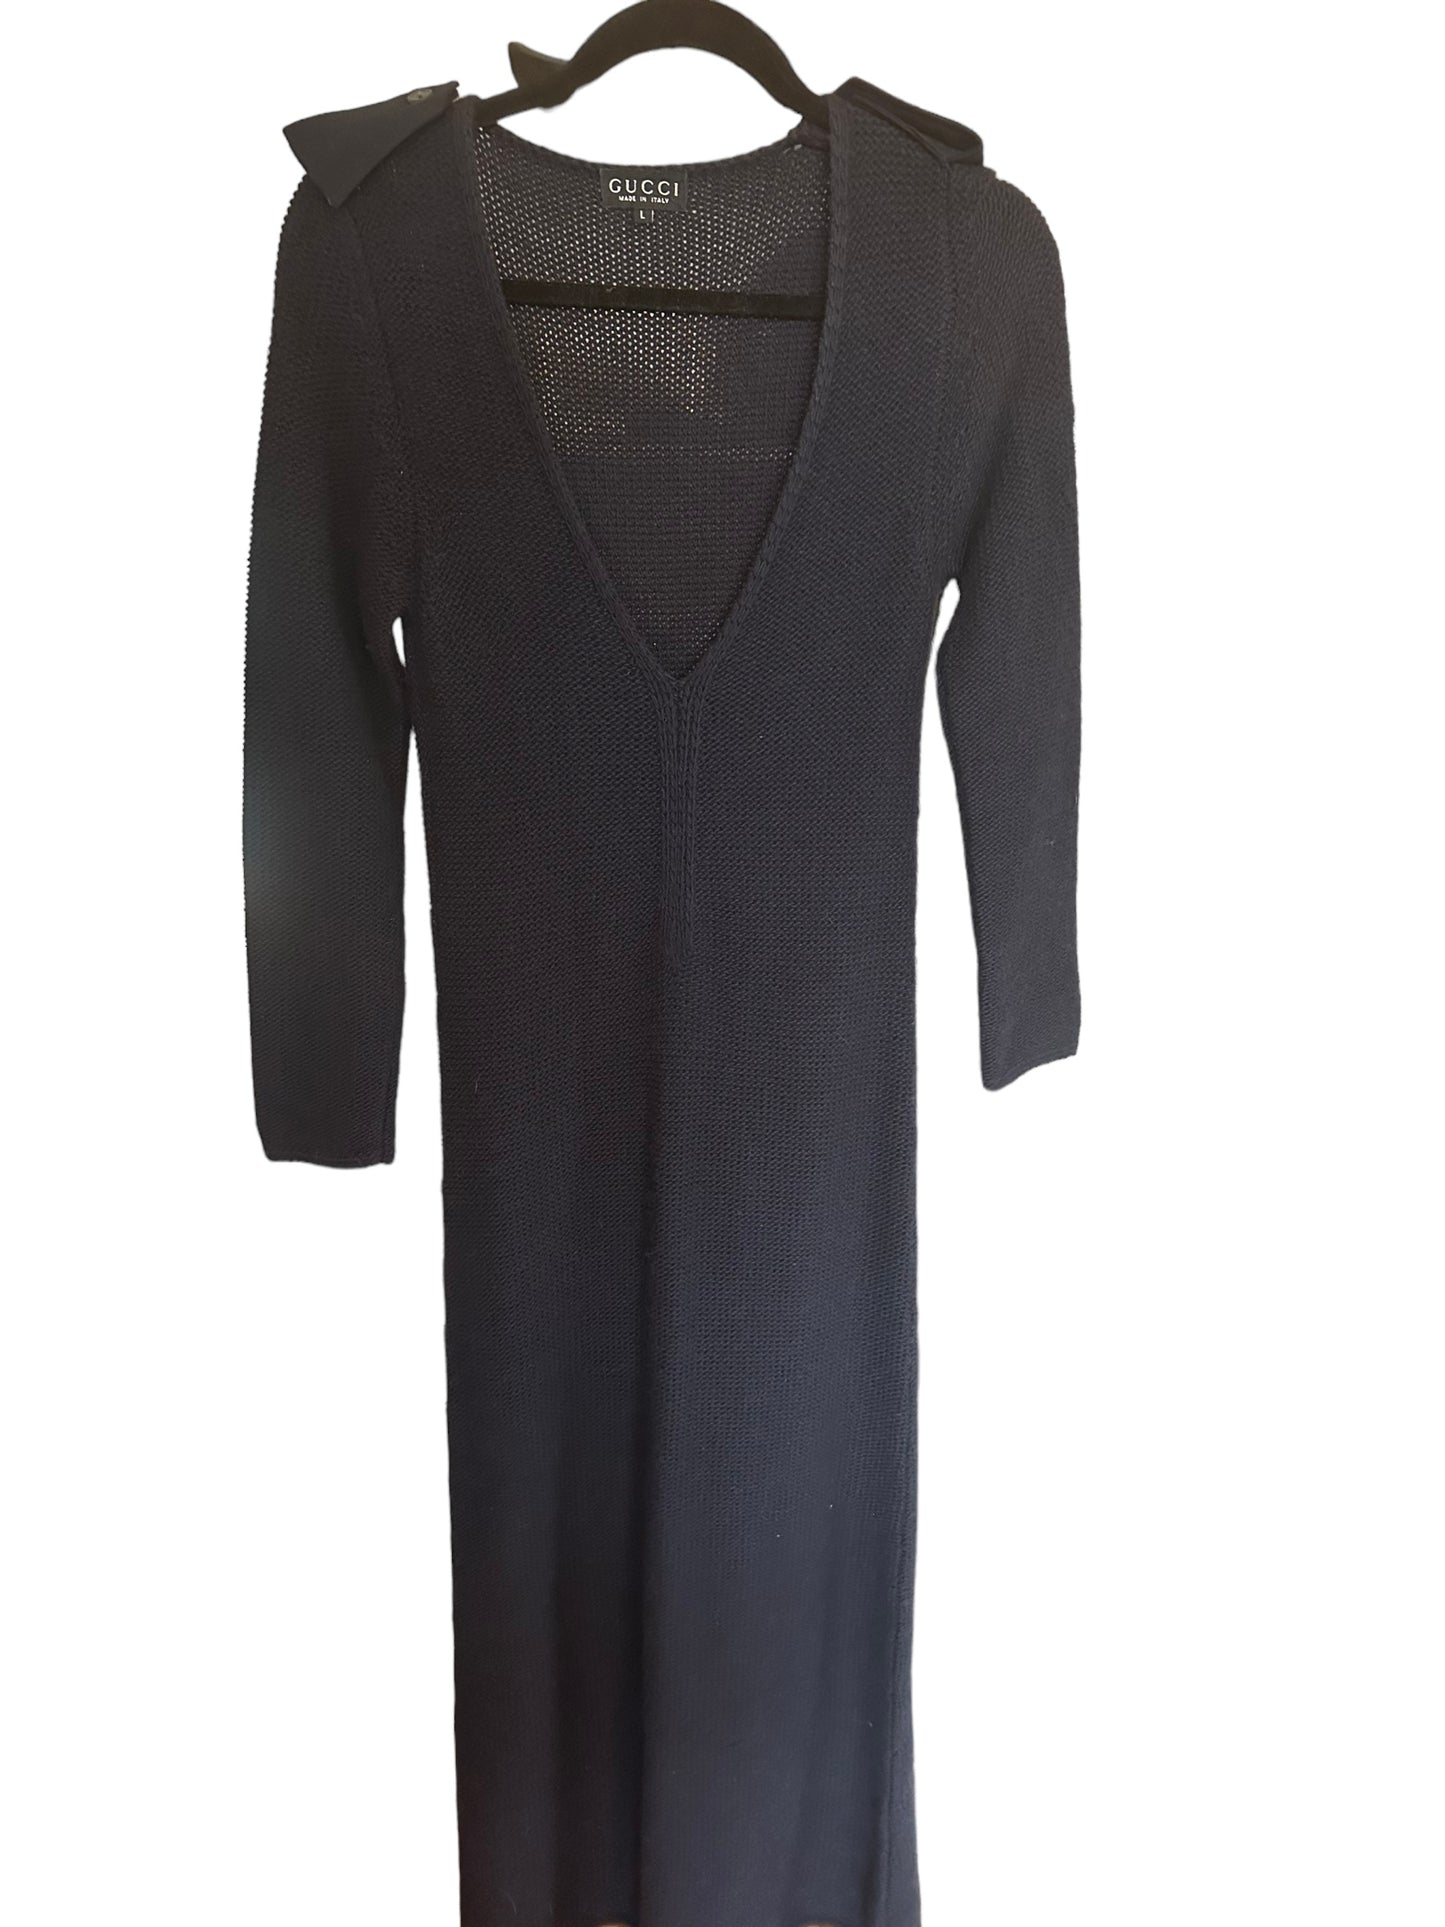 Gucci Tom Ford 1996 cashmere plunge epaulet maxi dress size L fits many